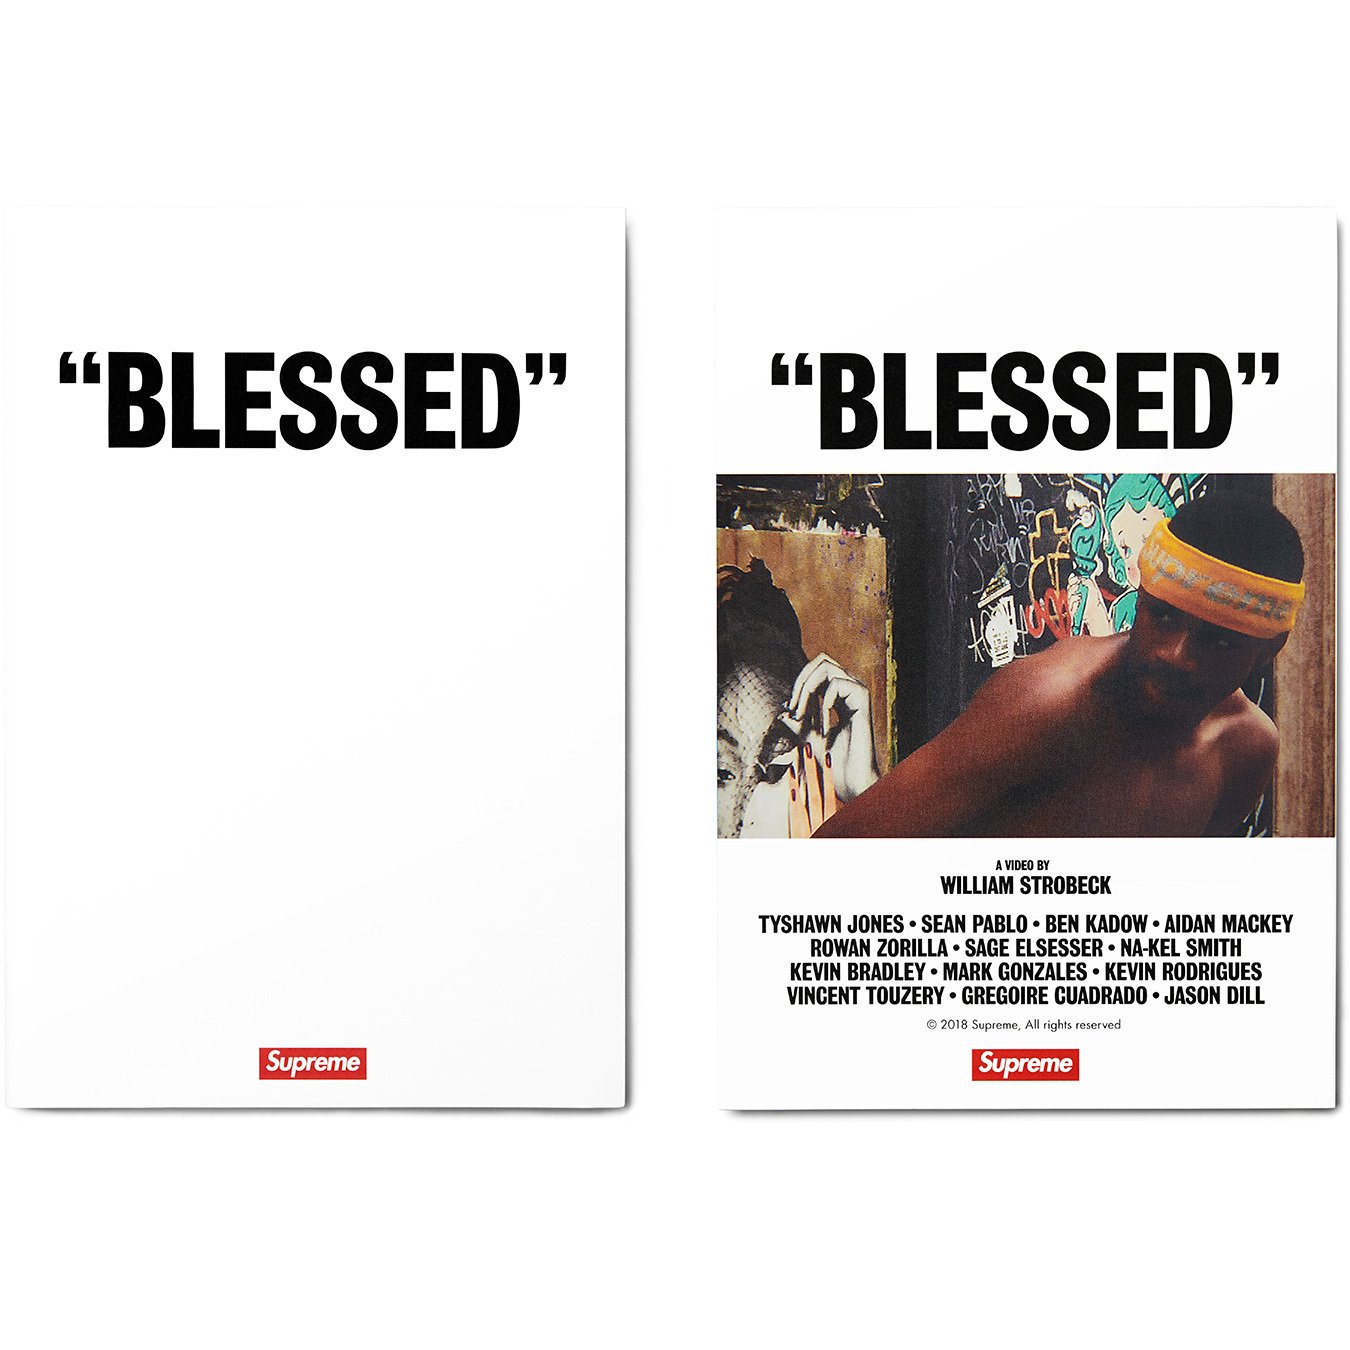 BLESSED” DVD - fall winter 2018 - Supreme